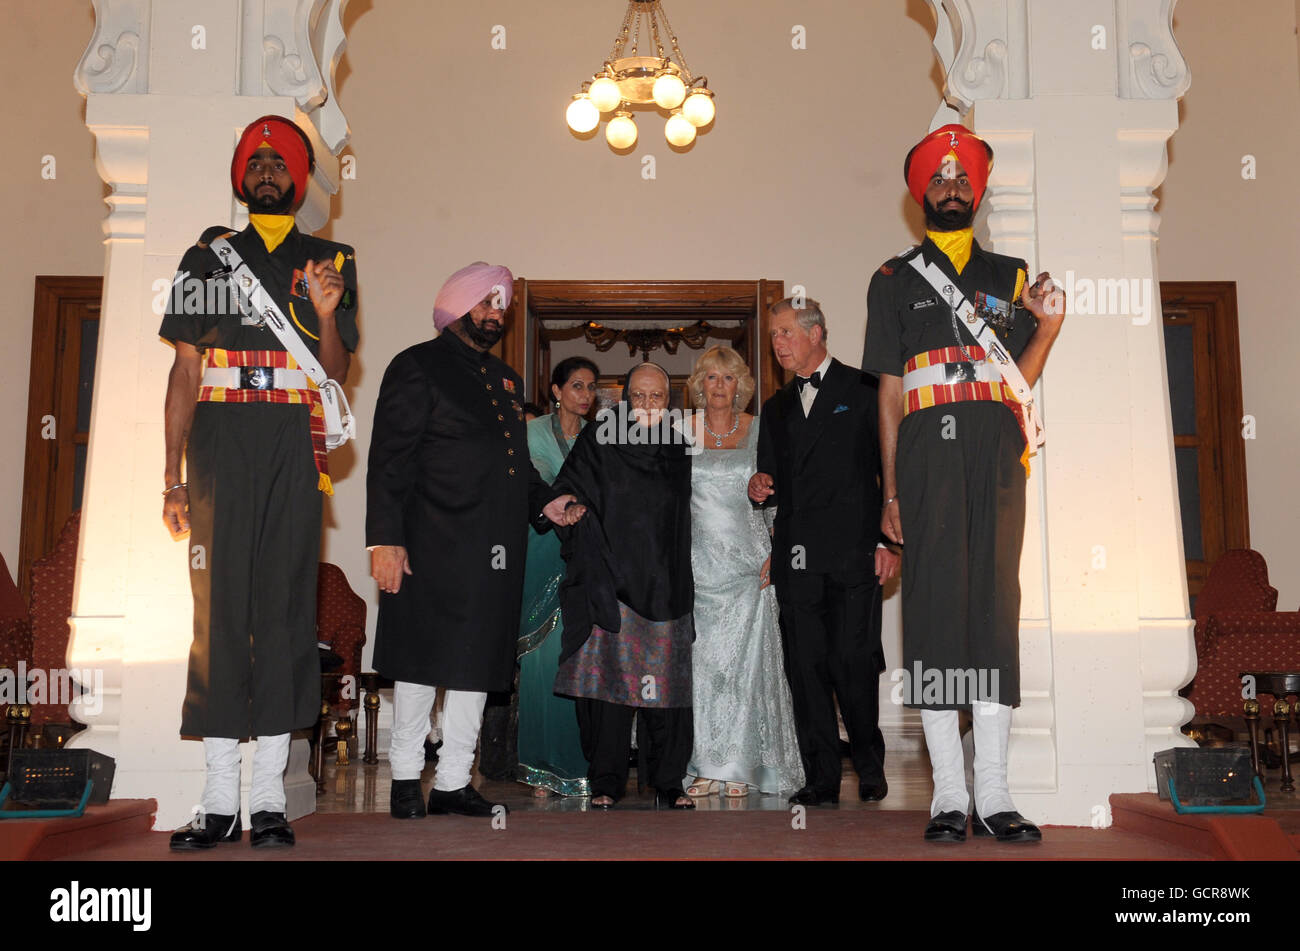 The Prince of Wales and Duchess of Cornwall arrive at the Maharaja's palace (left to to right) Maharaja of Patiala Captain Amarinder Singh, Maharani of Patiala Preneet Kaur, the Maharaja's mother, (name not given), the Duchess of Cornwall and the Prince of Wales) in Patialia, India. Stock Photo